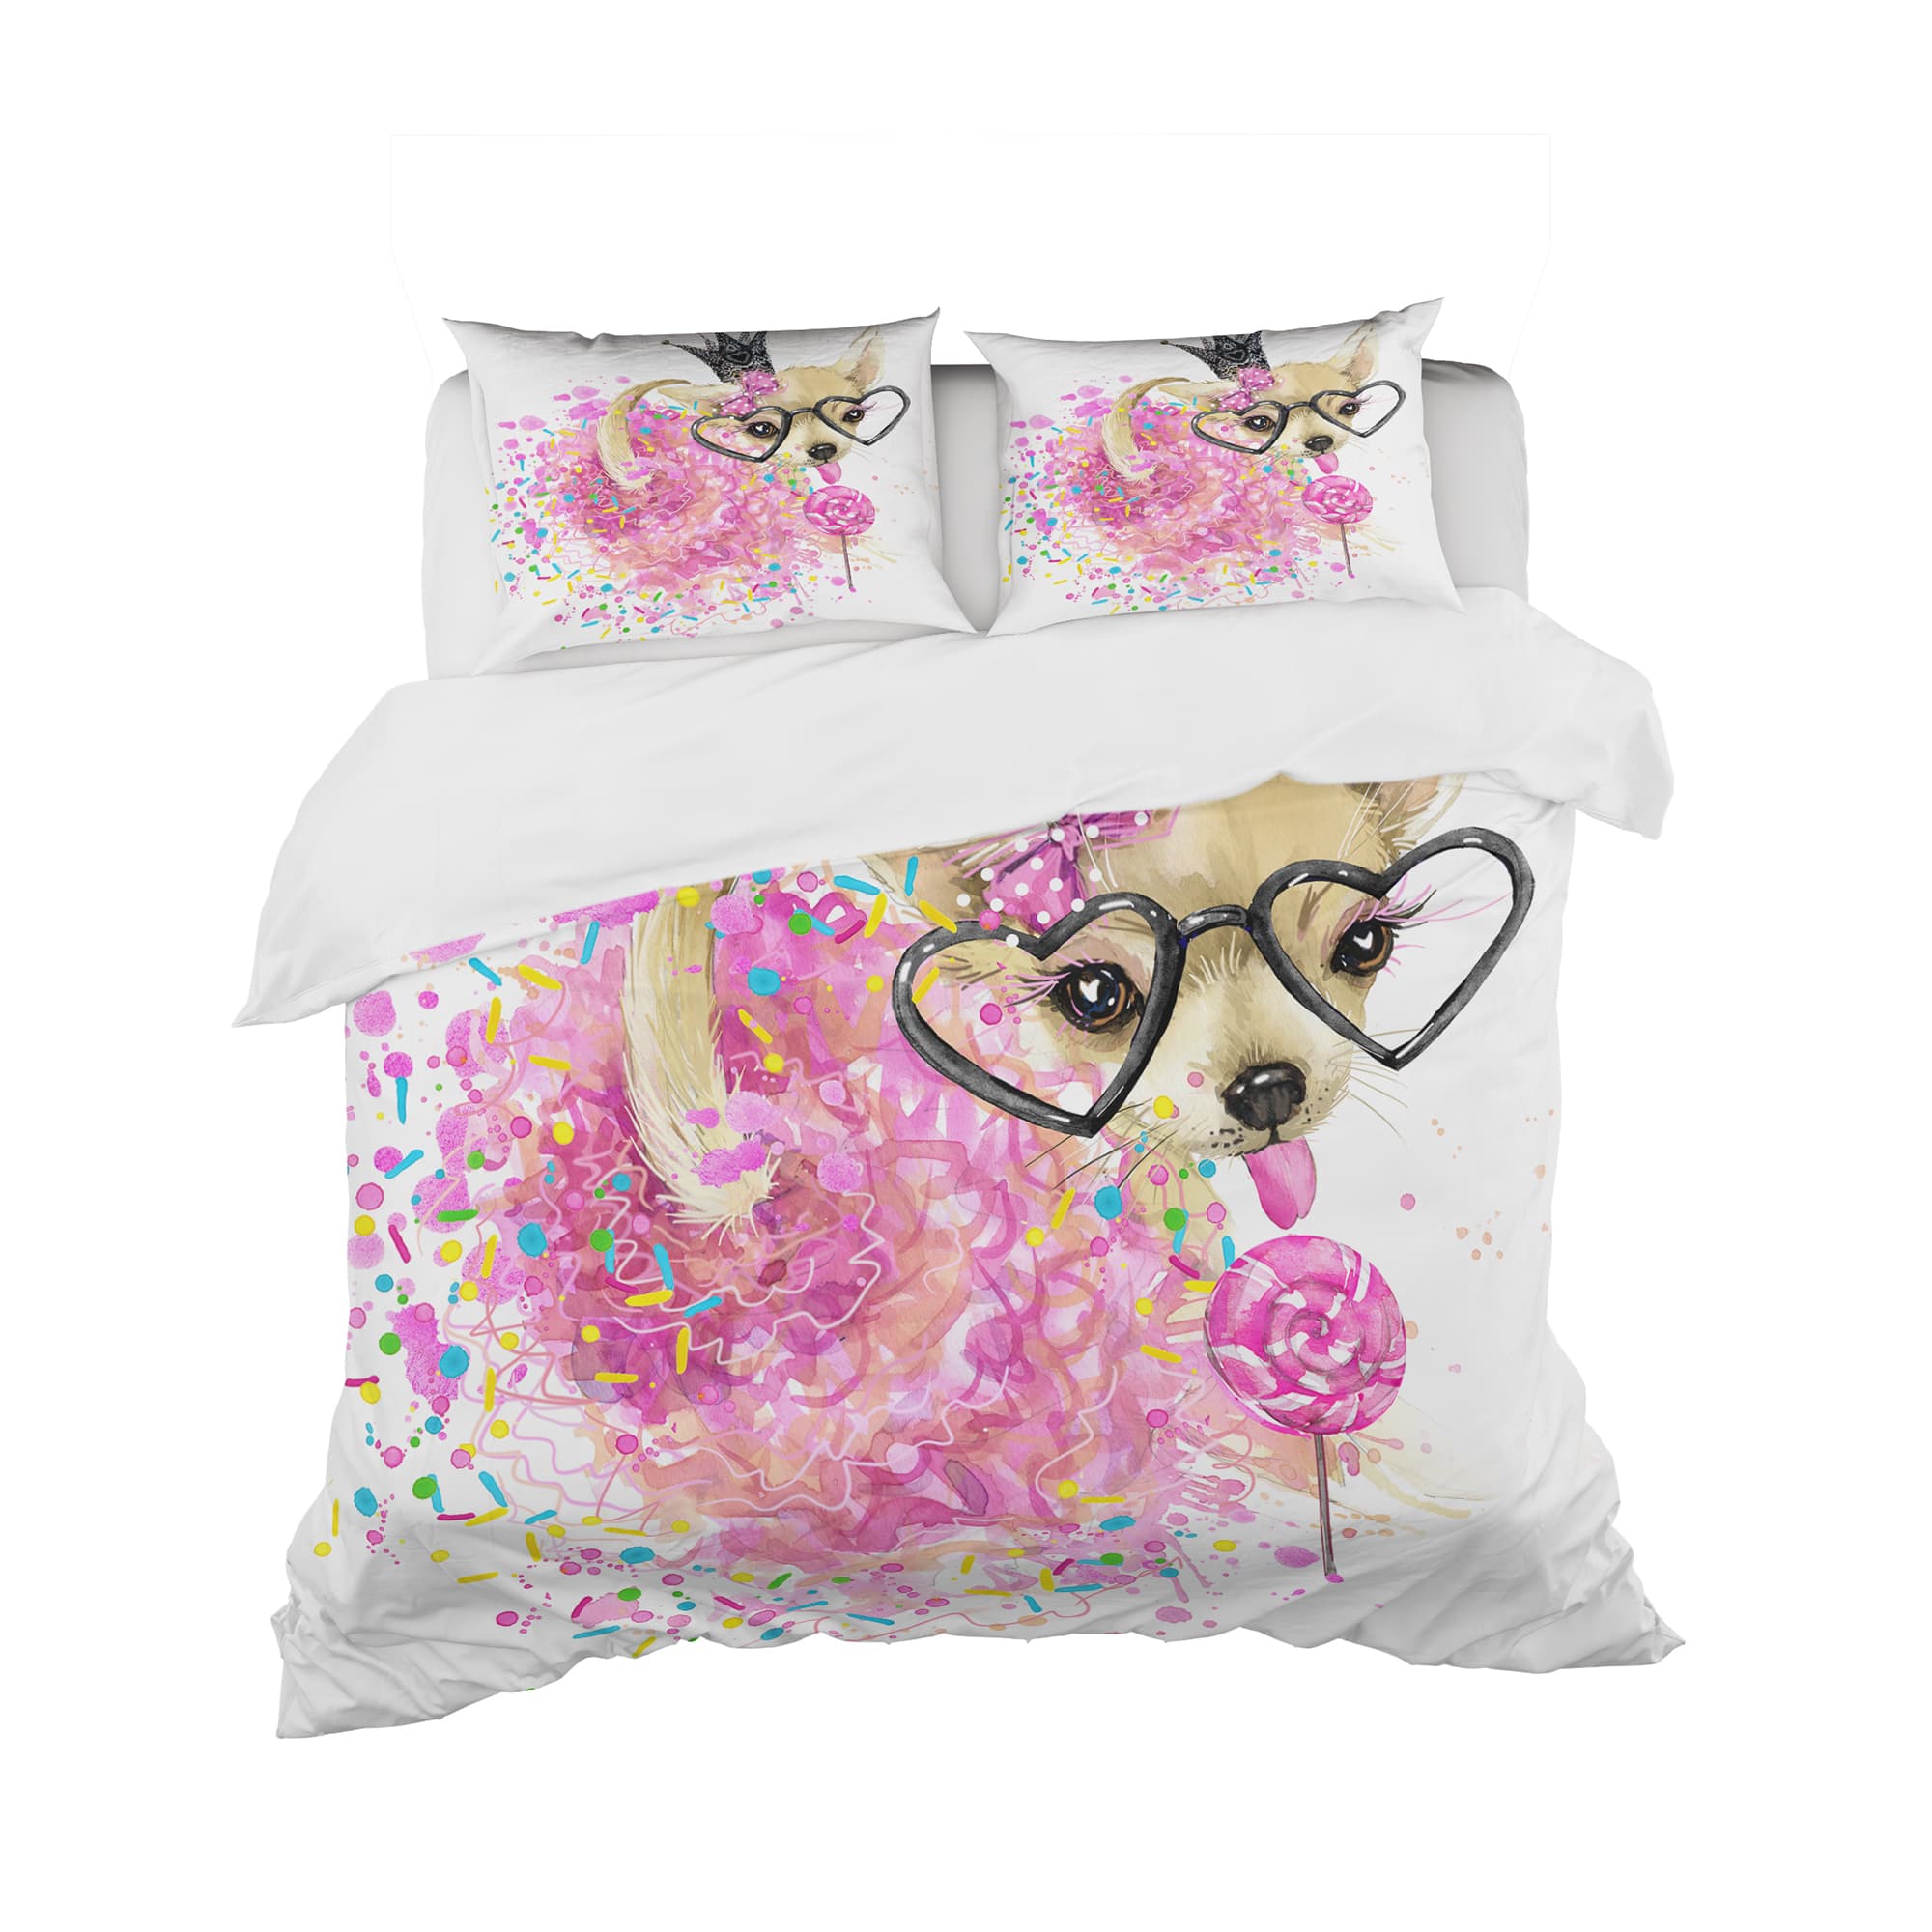 Designart &#x27;Cute Dog with Crown and Glasses - Modern Duvet Cover Set